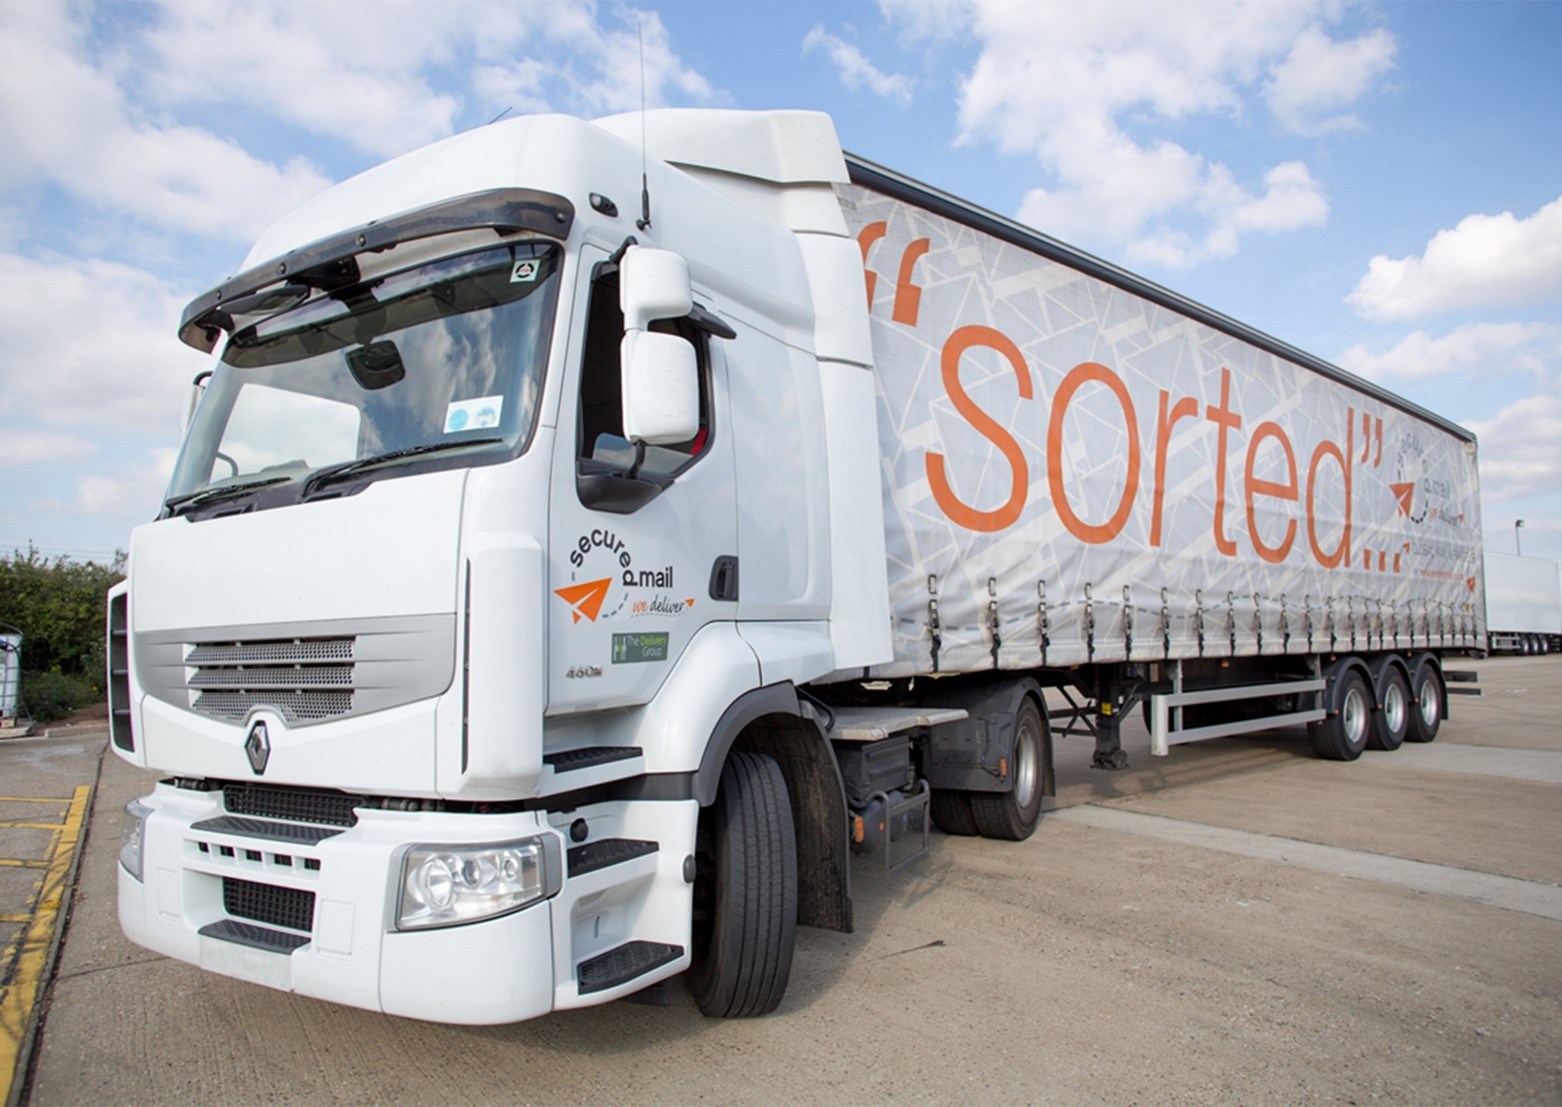 The Delivery Group reports £124m turnover for 2015